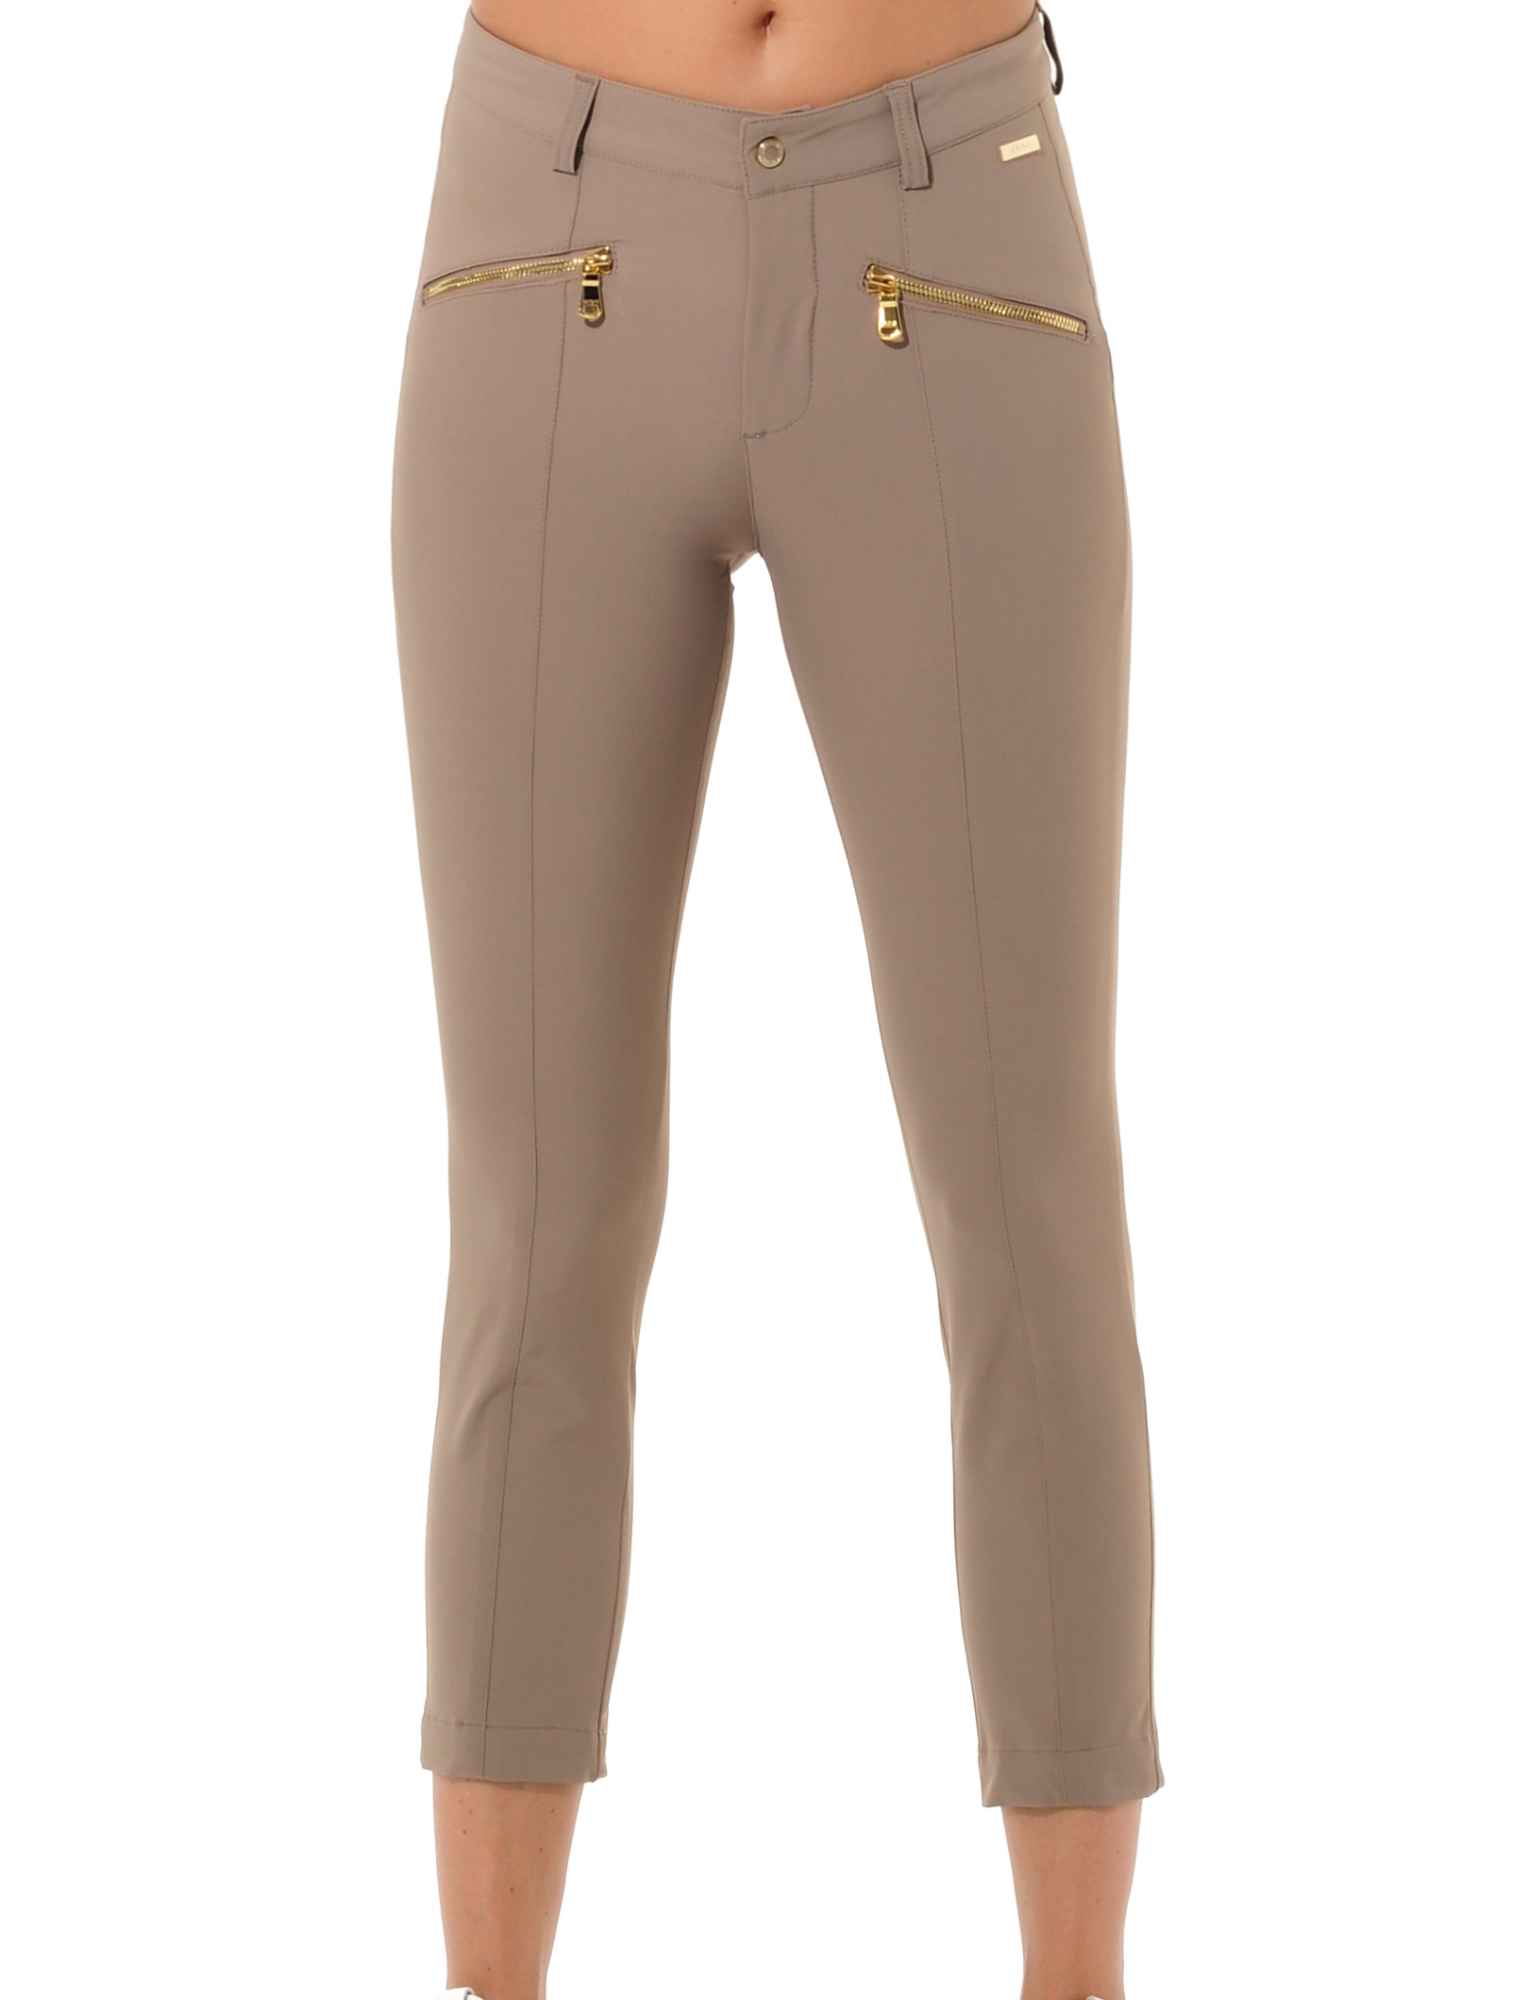 4way stretch shiny gold zip curvy cropped pants toffee 